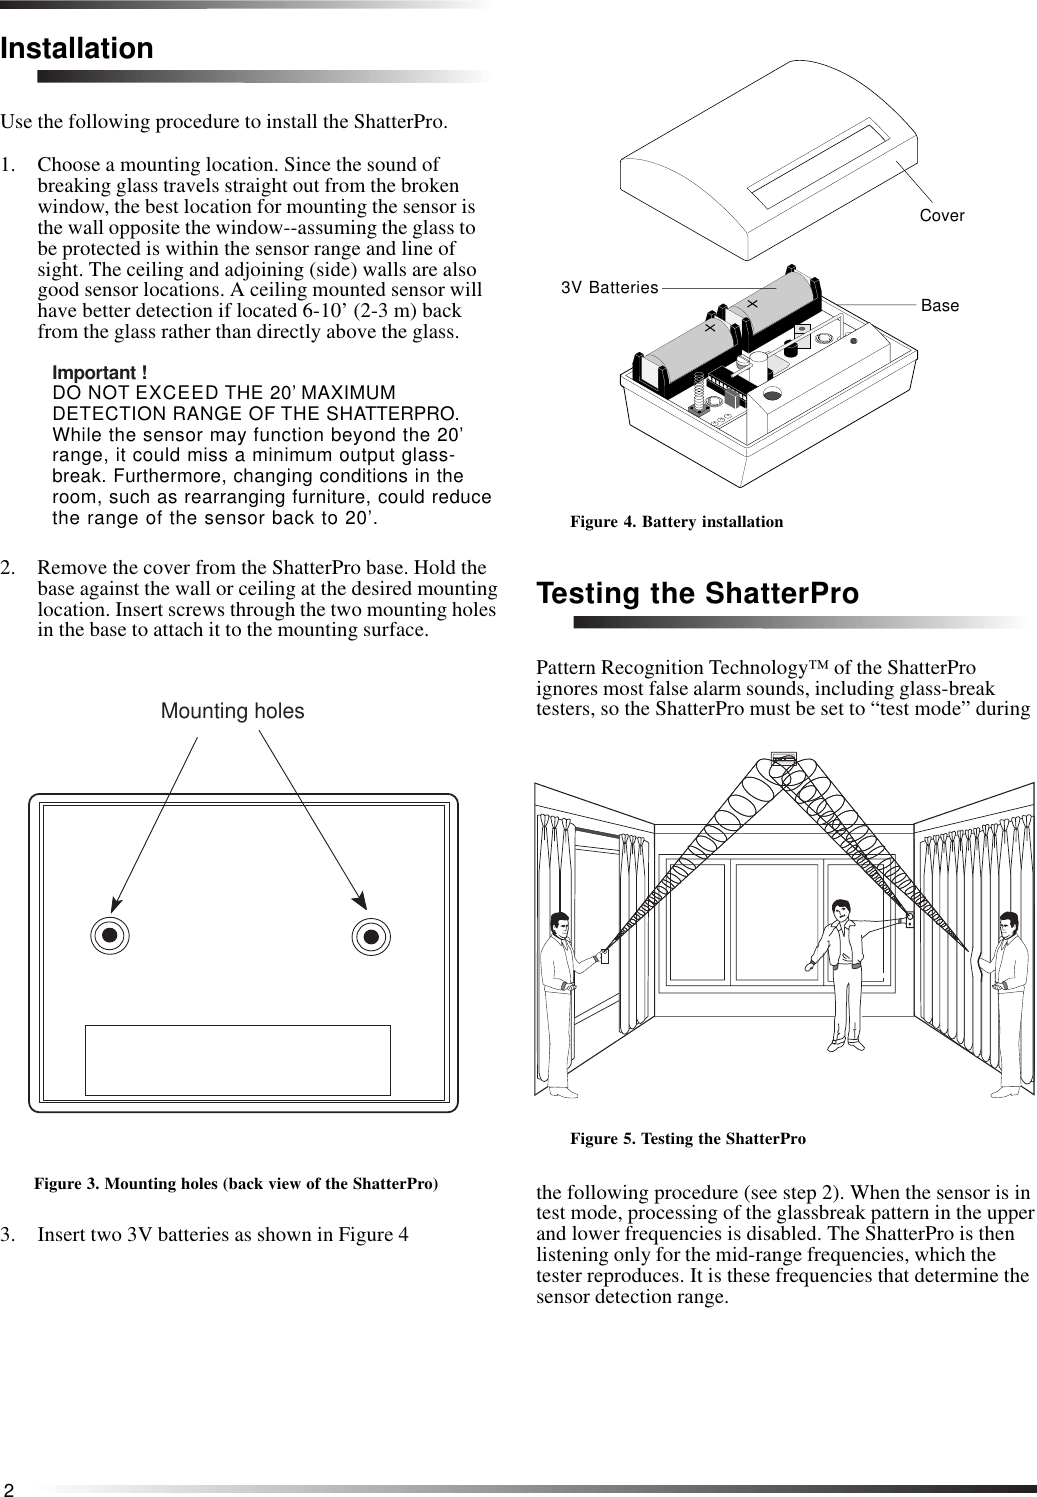 2InstallationUse the following procedure to install the ShatterPro.1. Choose a mounting location. Since the sound ofbreaking glass travels straight out from the brokenwindow, the best location for mounting the sensor isthe wall opposite the window--assuming the glass tobe protected is within the sensor range and line ofsight. The ceiling and adjoining (side) walls are alsogood sensor locations. A ceiling mounted sensor willhave better detection if located 6-10’ (2-3 m) backfrom the glass rather than directly above the glass.Important !DO NOT EXCEED THE 20’ MAXIMUMDETECTION RANGE OF THE SHATTERPRO.While the sensor may function beyond the 20’range, it could miss a minimum output glass-break. Furthermore, changing conditions in theroom, such as rearranging furniture, could reducethe range of the sensor back to 20’.2. Remove the cover from the ShatterPro base. Hold thebase against the wall or ceiling at the desired mountinglocation. Insert screws through the two mounting holesin the base to attach it to the mounting surface.        Mounting holesFigure 3. Mounting holes (back view of the ShatterPro)3. Insert two 3V batteries as shown in Figure 4Figure 4. Battery installationTesting the ShatterProPattern Recognition Technology™ of the ShatterProignores most false alarm sounds, including glass-breaktesters, so the ShatterPro must be set to “test mode” duringFigure 5. Testing the ShatterProthe following procedure (see step 2). When the sensor is intest mode, processing of the glassbreak pattern in the upperand lower frequencies is disabled. The ShatterPro is thenlistening only for the mid-range frequencies, which thetester reproduces. It is these frequencies that determine thesensor detection range.CoverBase3V Batteries